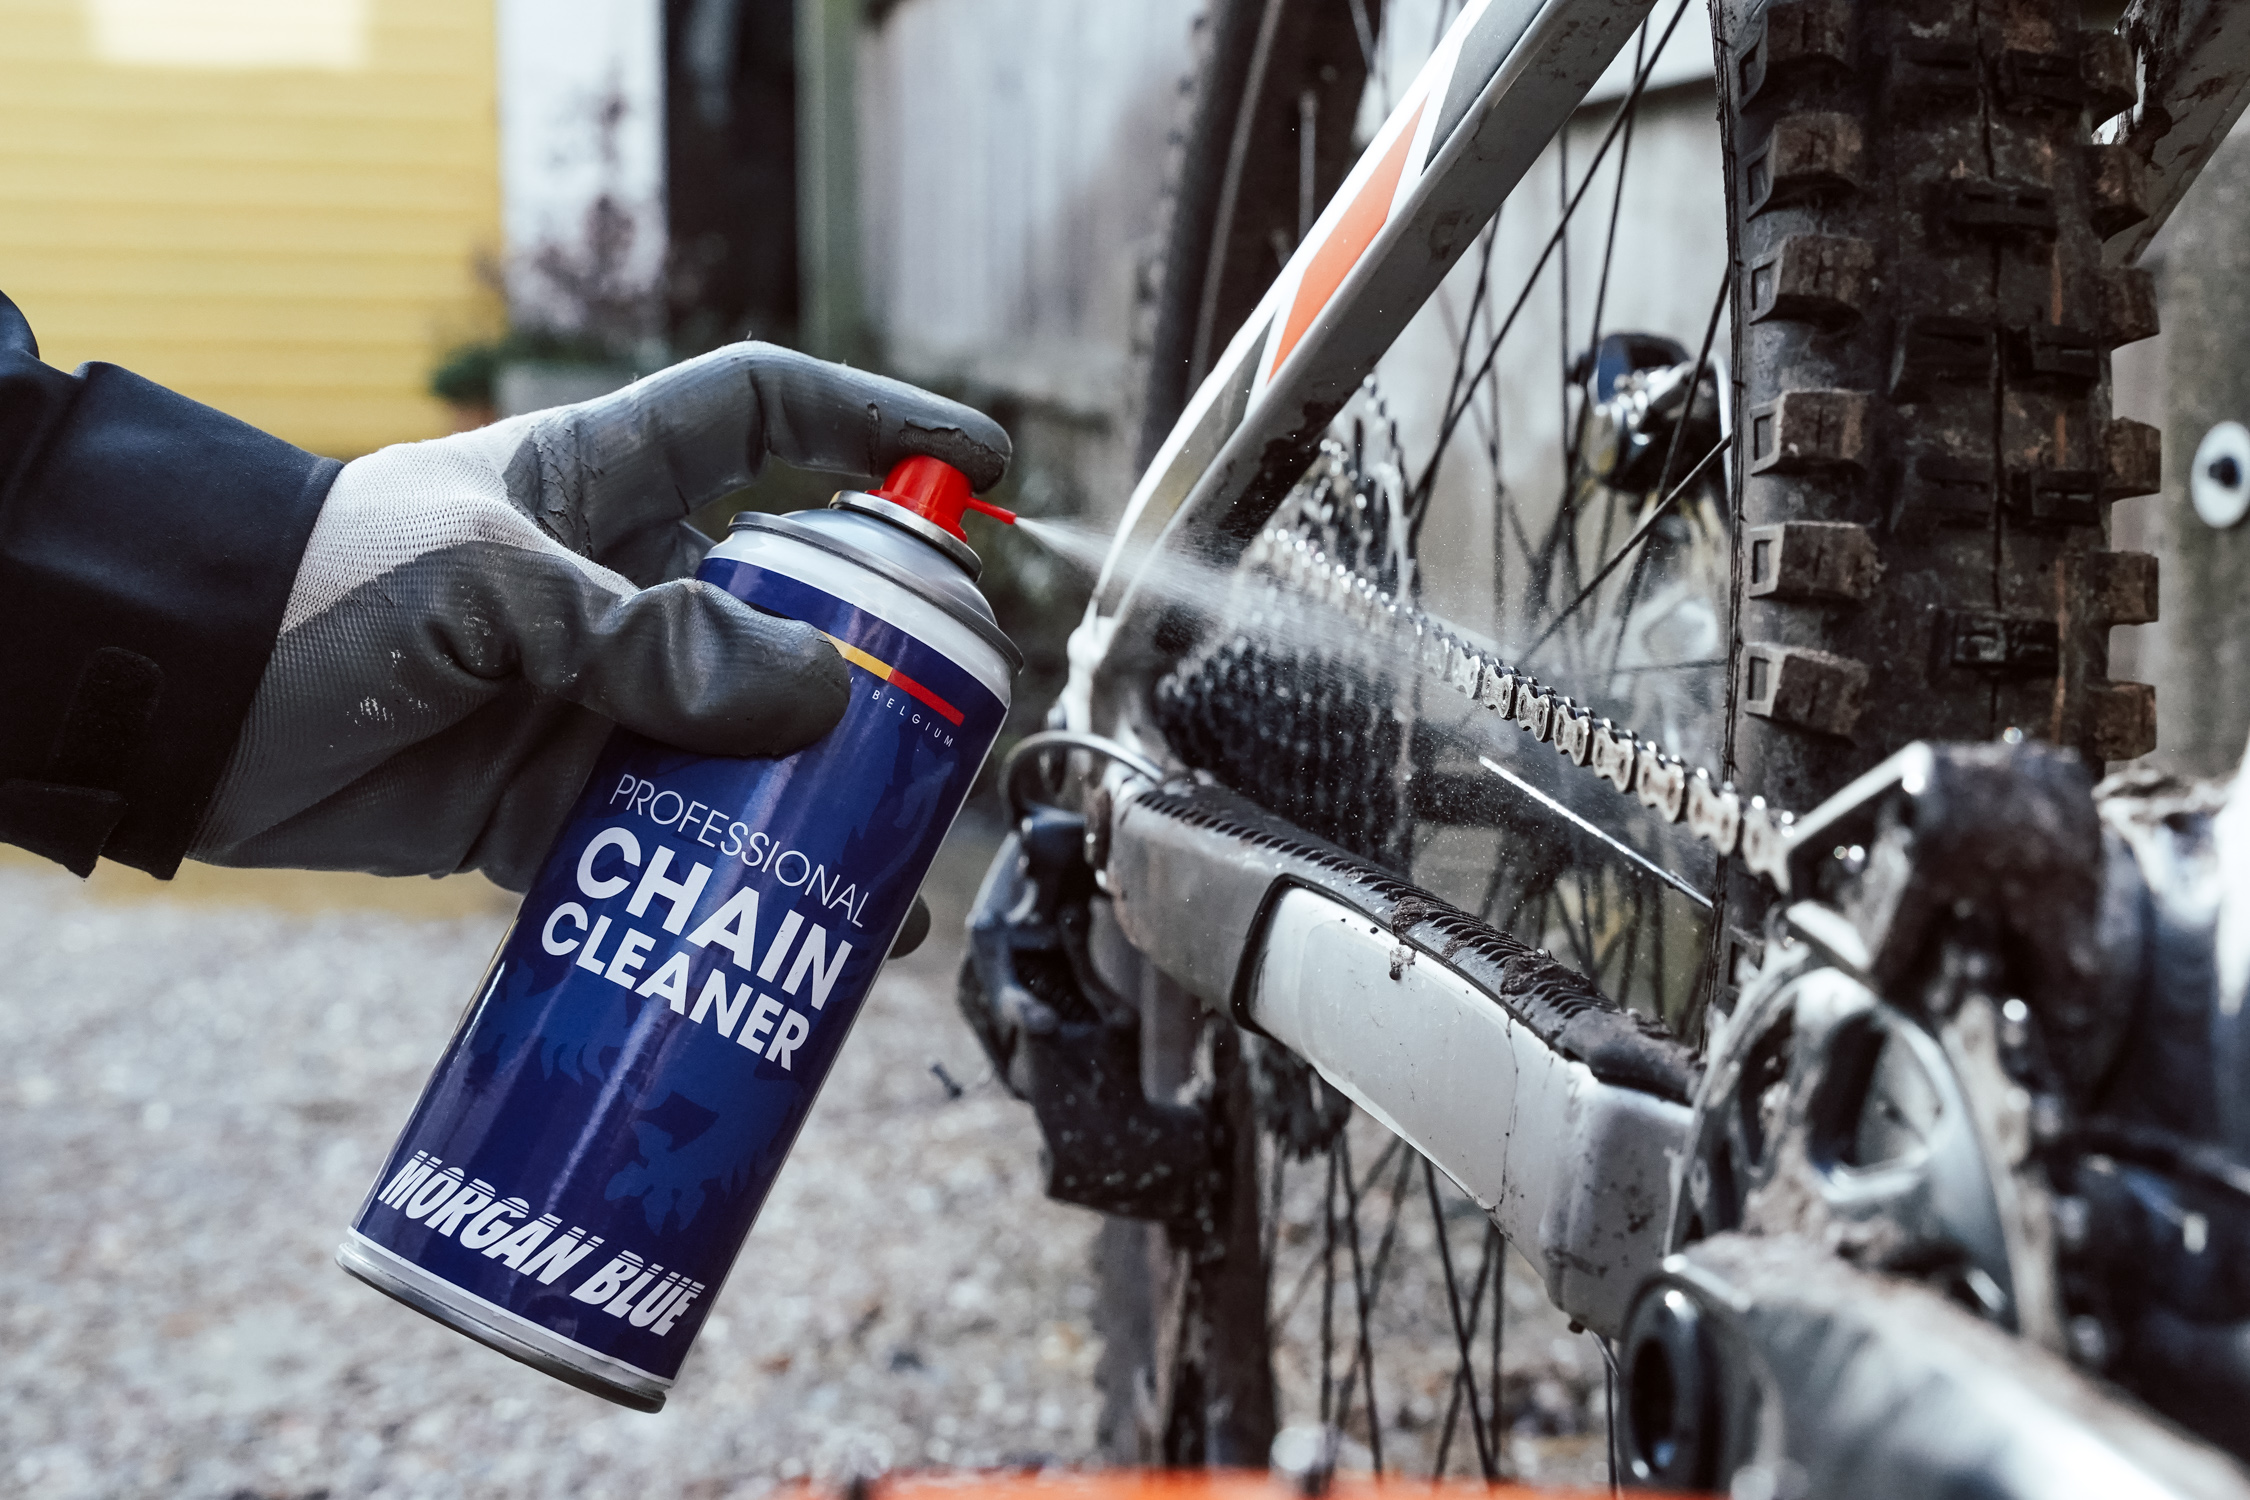 Buy the Best Bike Cleaning Products - Morgan Blue